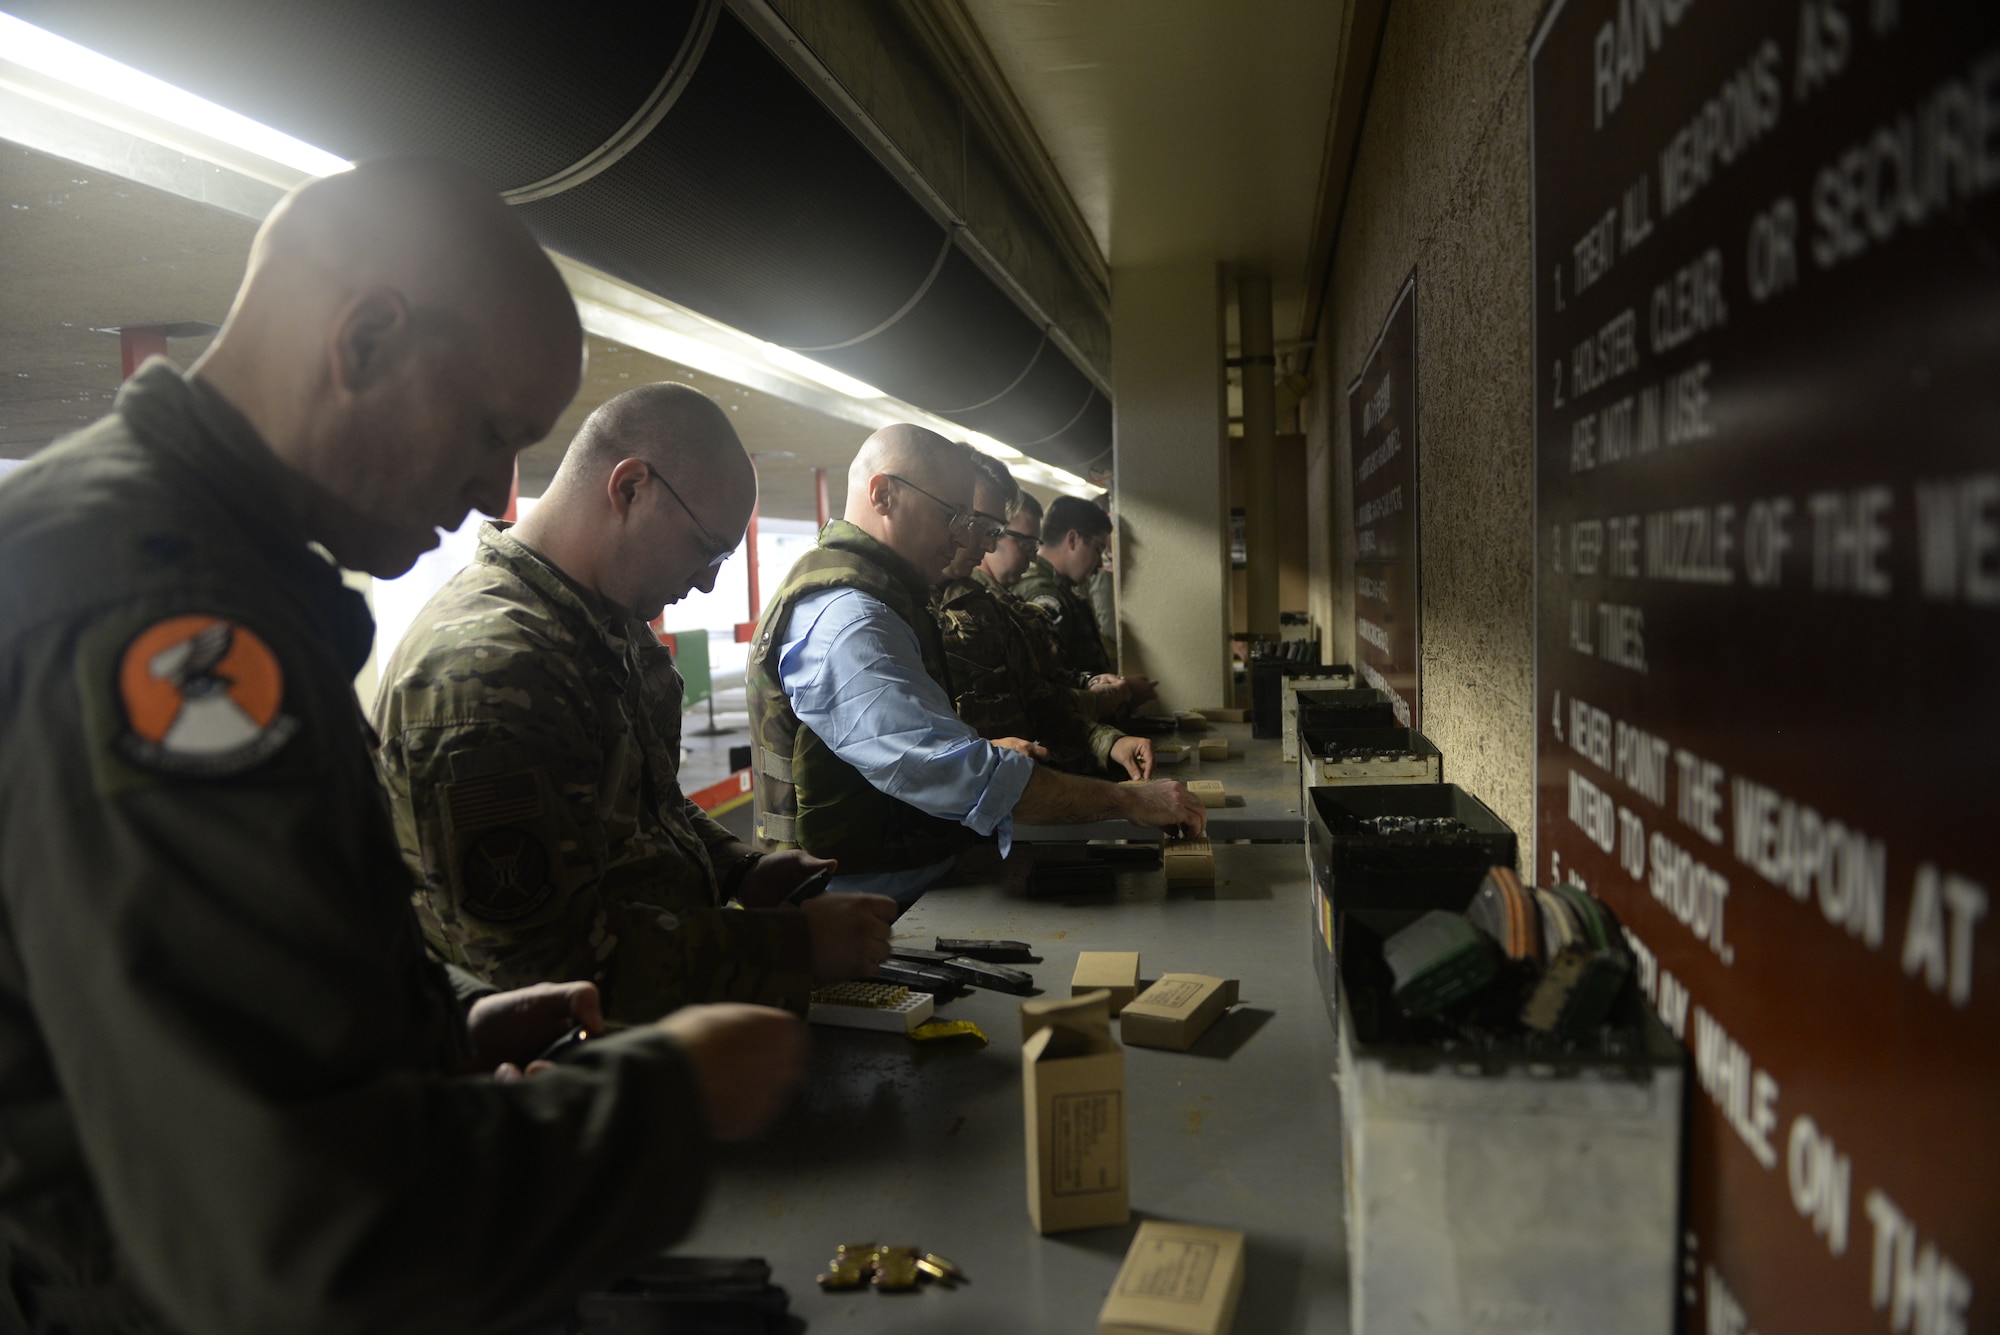 William P. McEvoy, 18th Wing History office chief, loads rouns into the magazine of an M9 pistol during qualification training June 24, 2019, at Kadena Air Base, Japan. McEvoy recently deployed to Southeast asia in support of operations occuring there. (U.S. Air Force photo by Staff Sgt. Benjamin Sutton)